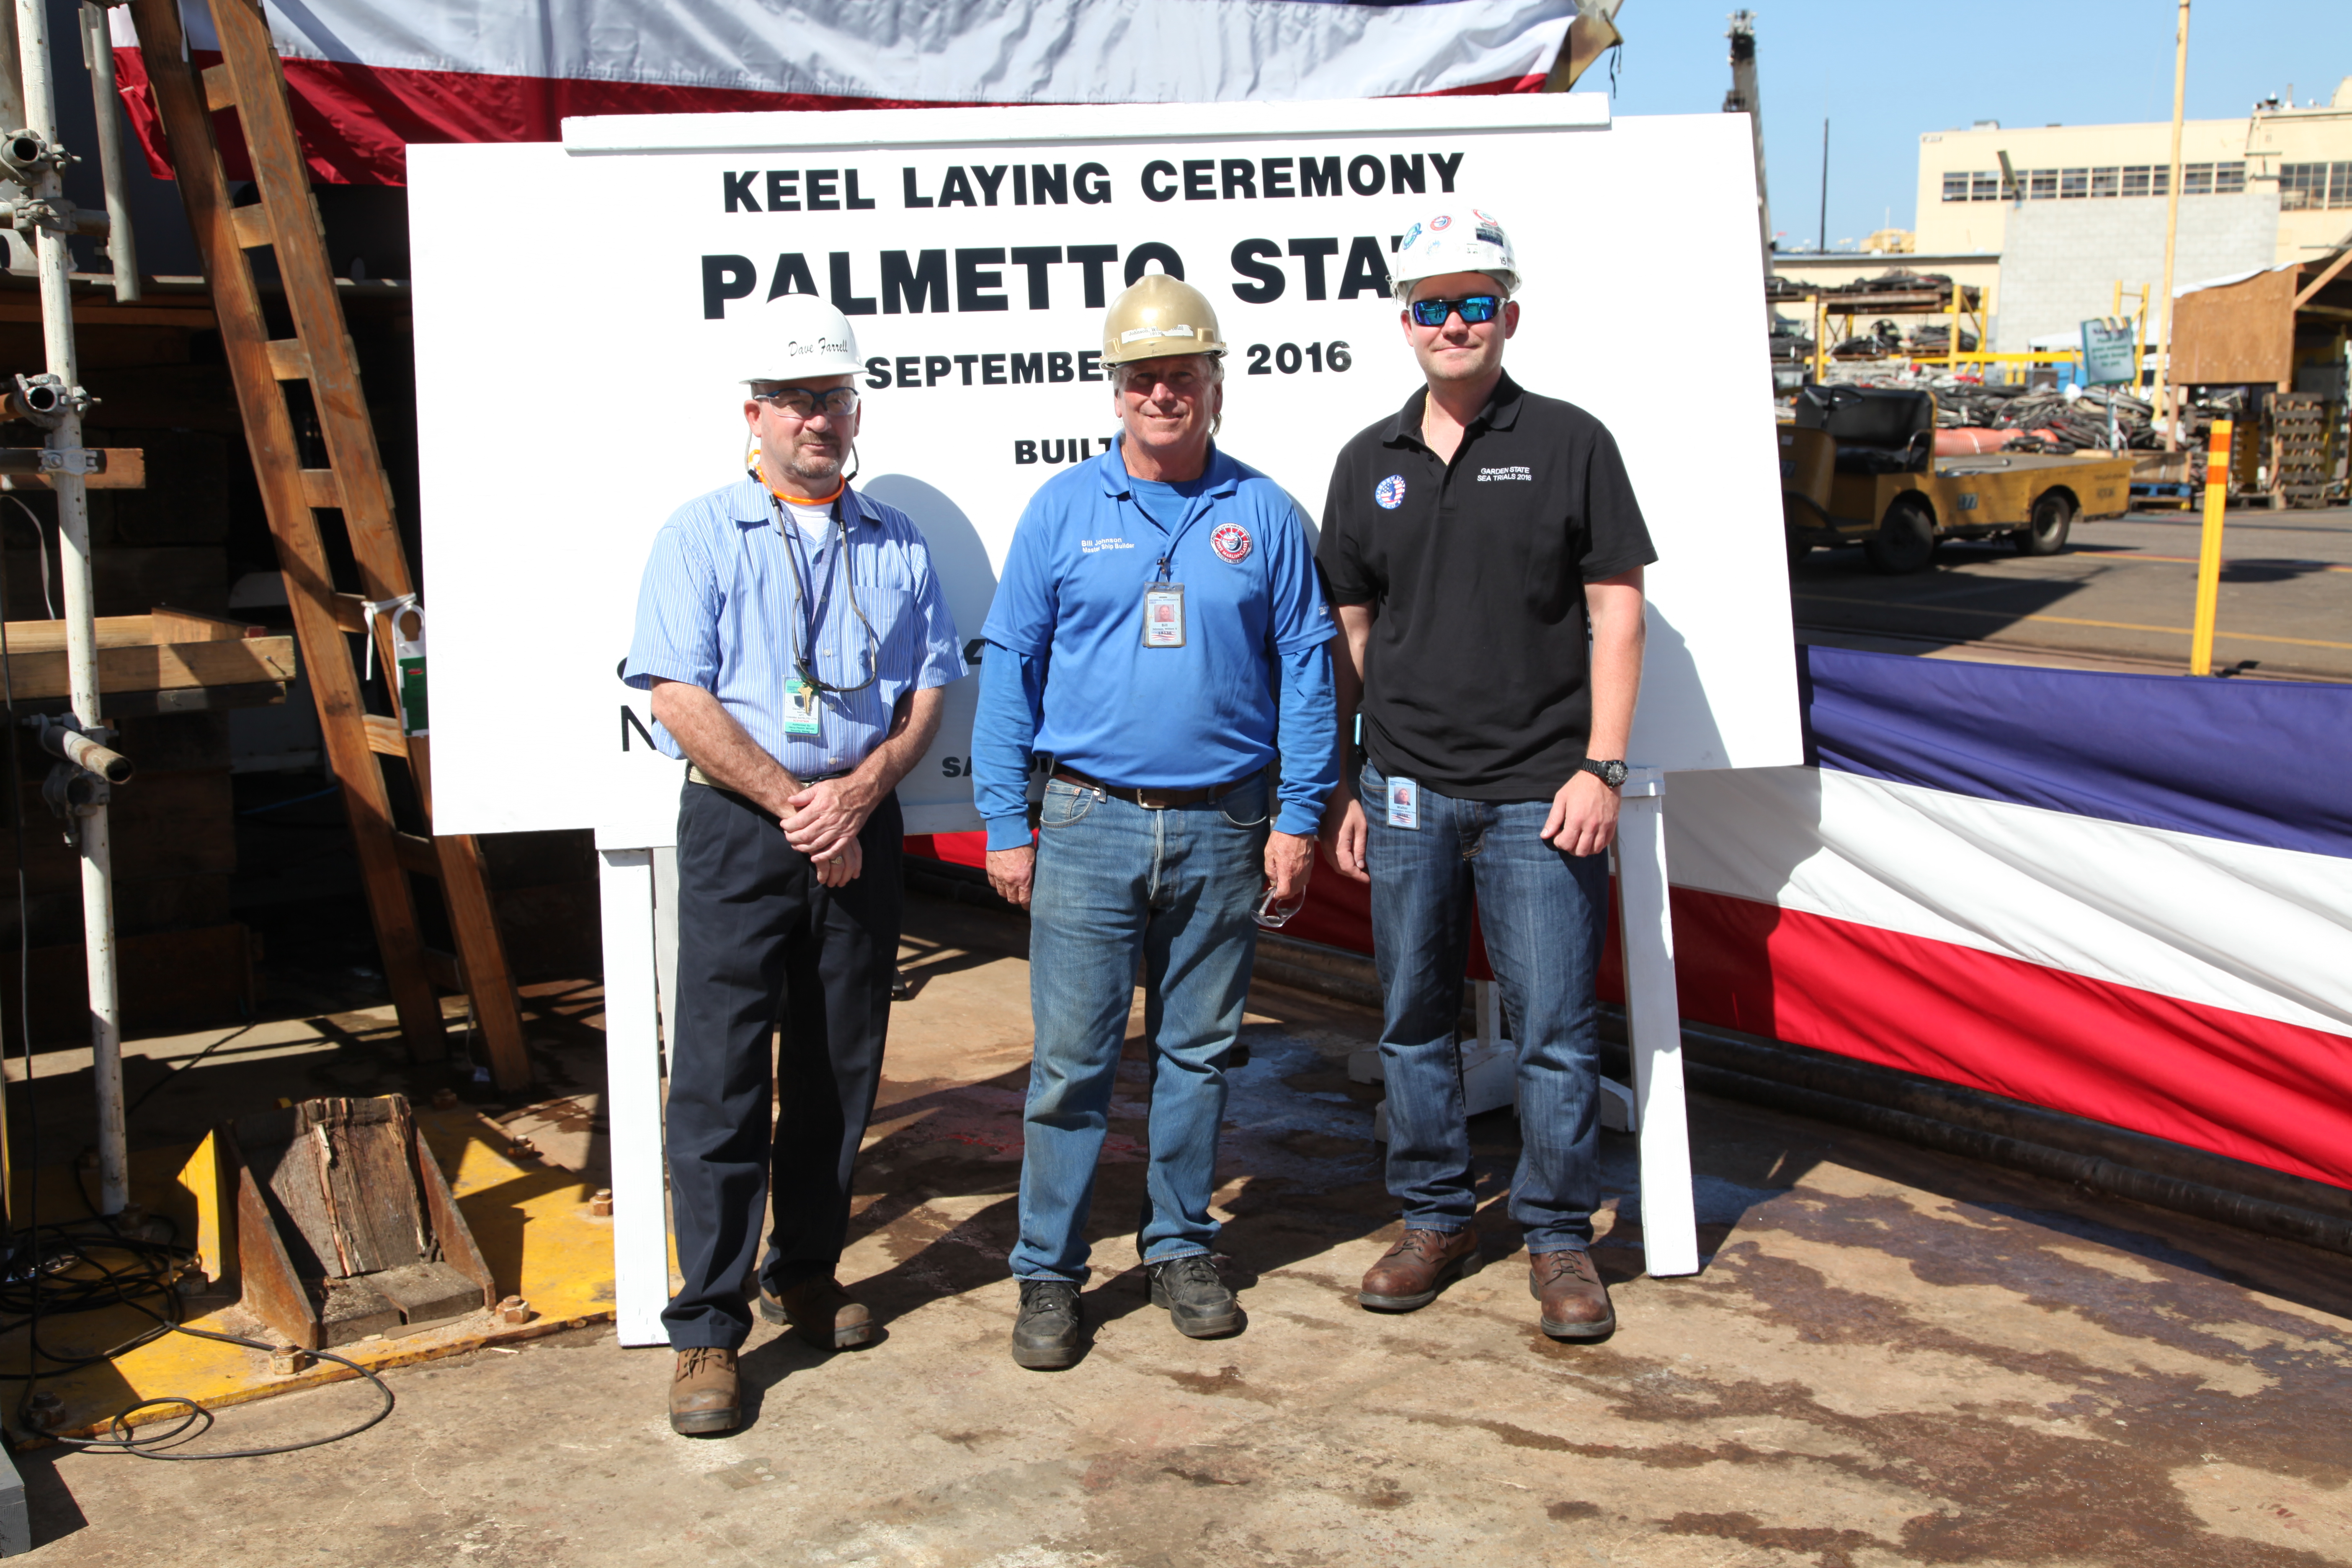 09-23-16 Keel Laying Ceremony (48)